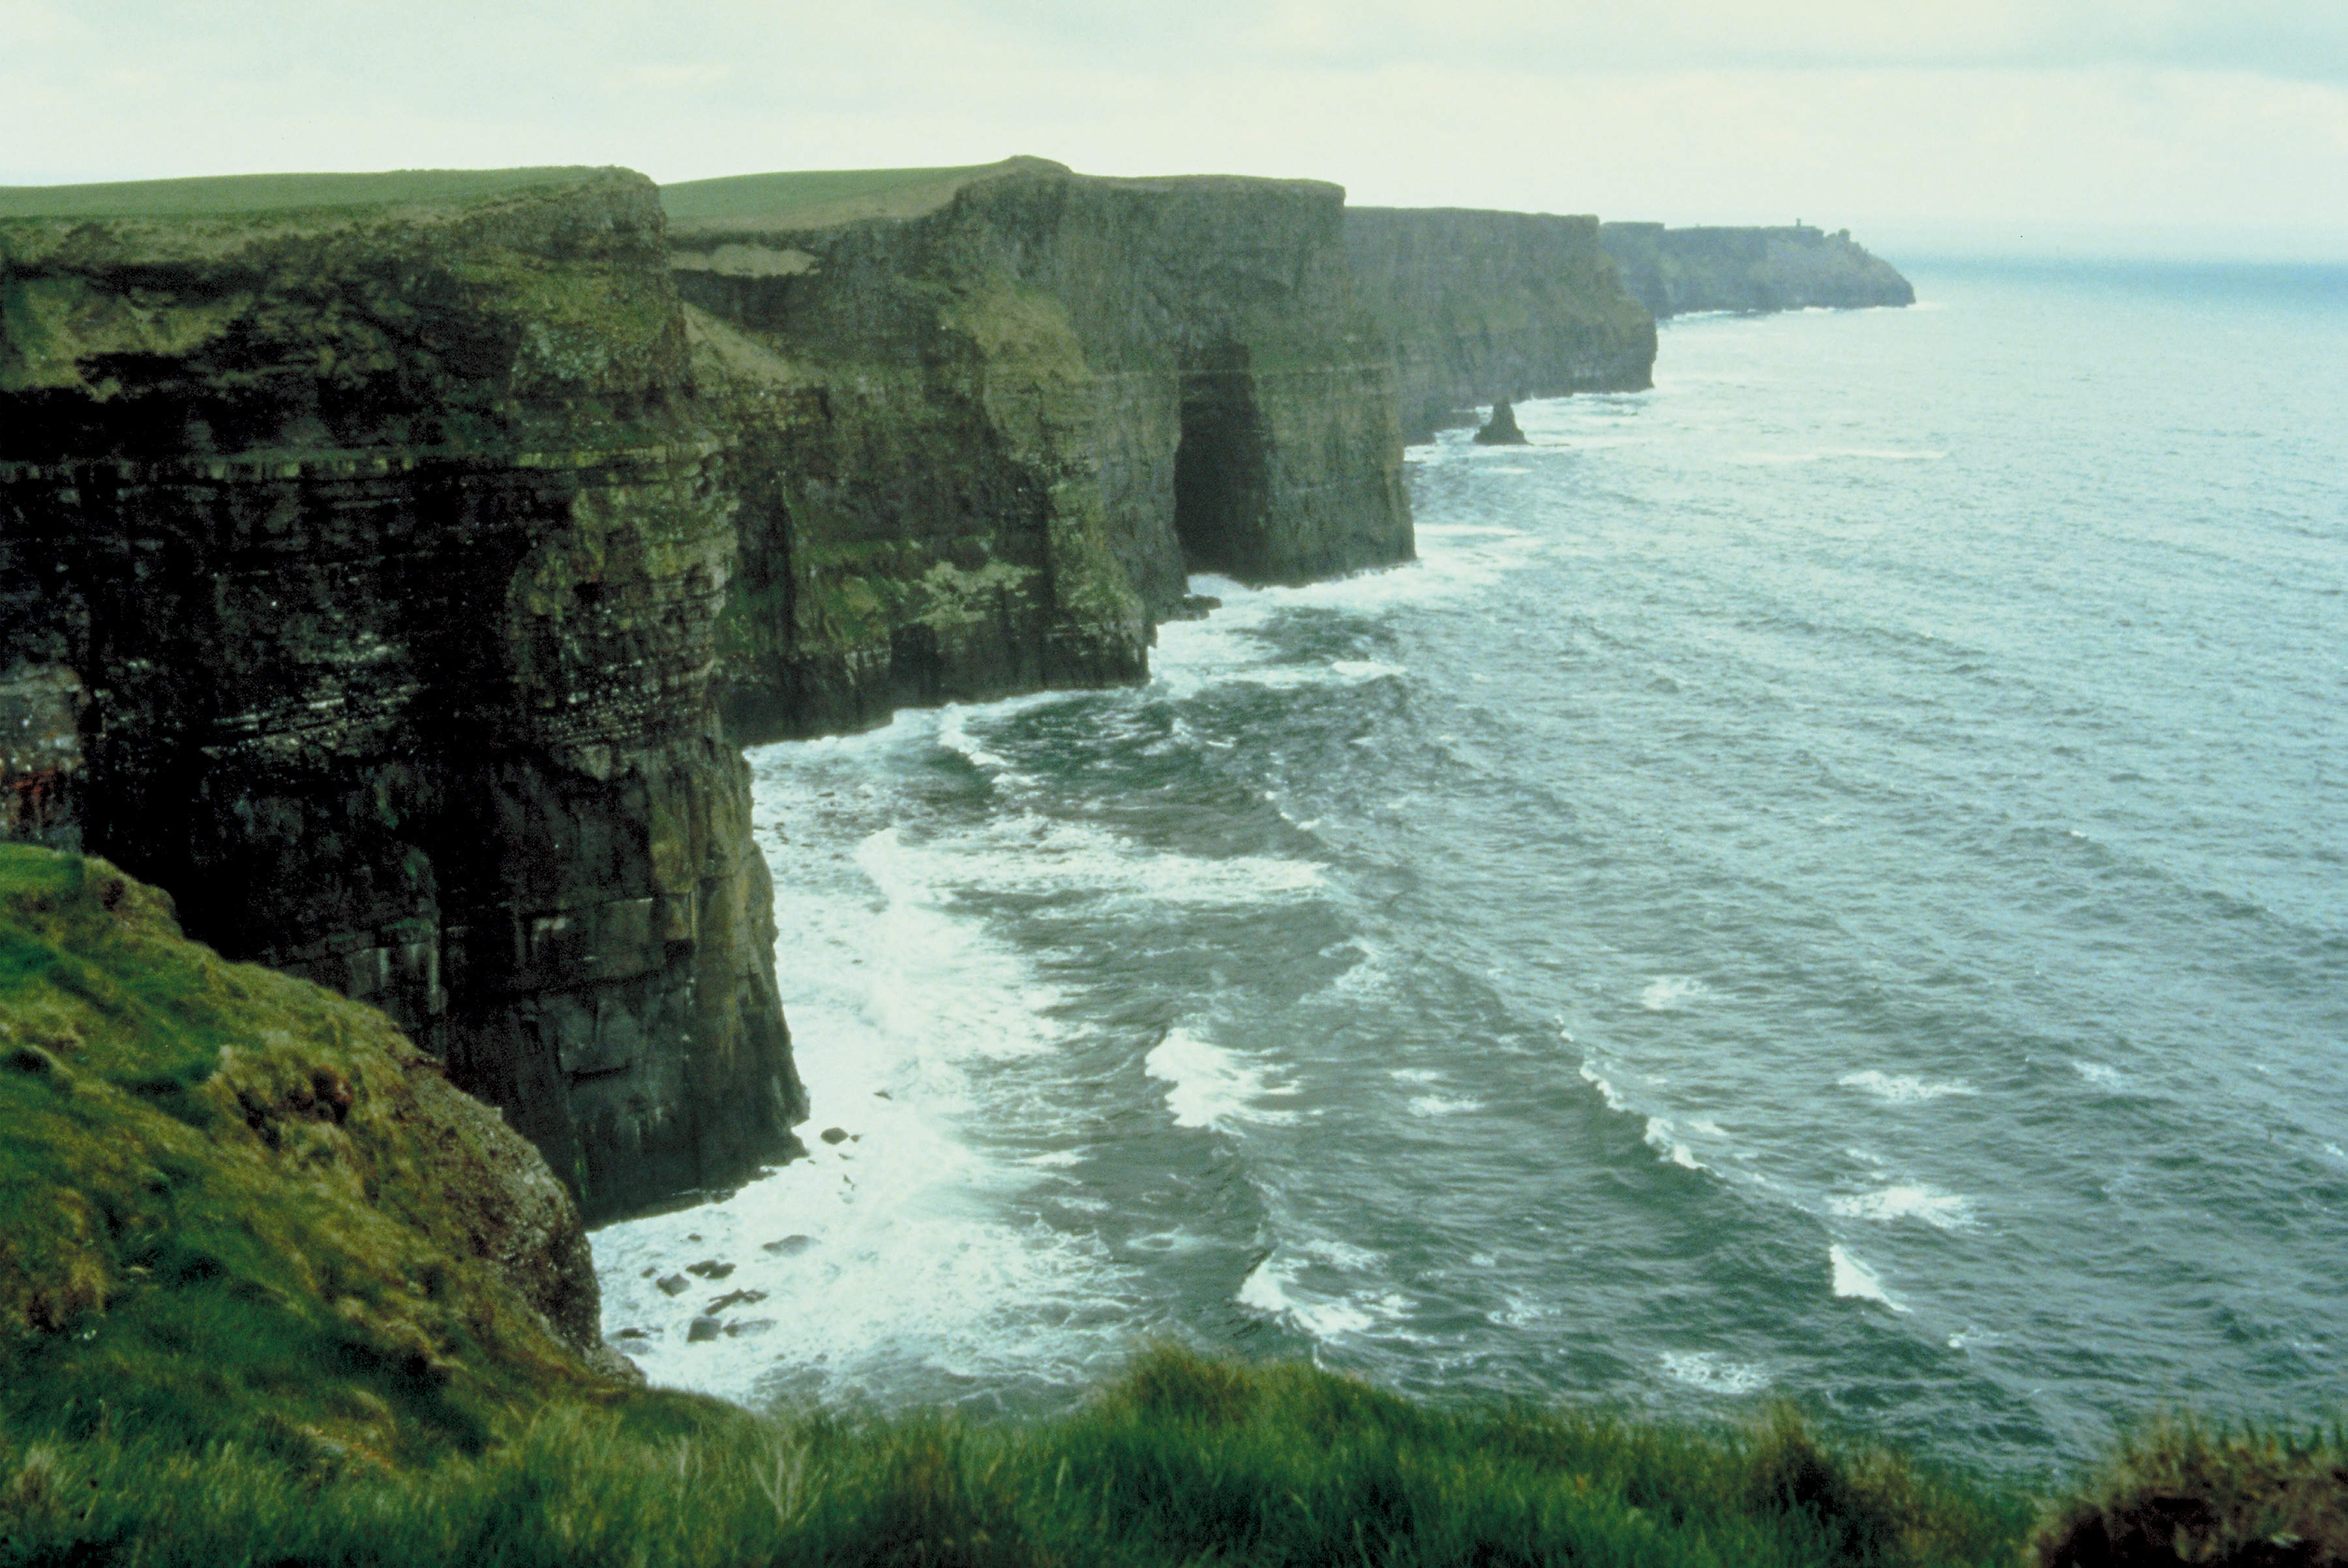 Some Interesting Facts about the Cliffs Of Moher in Co. Clare